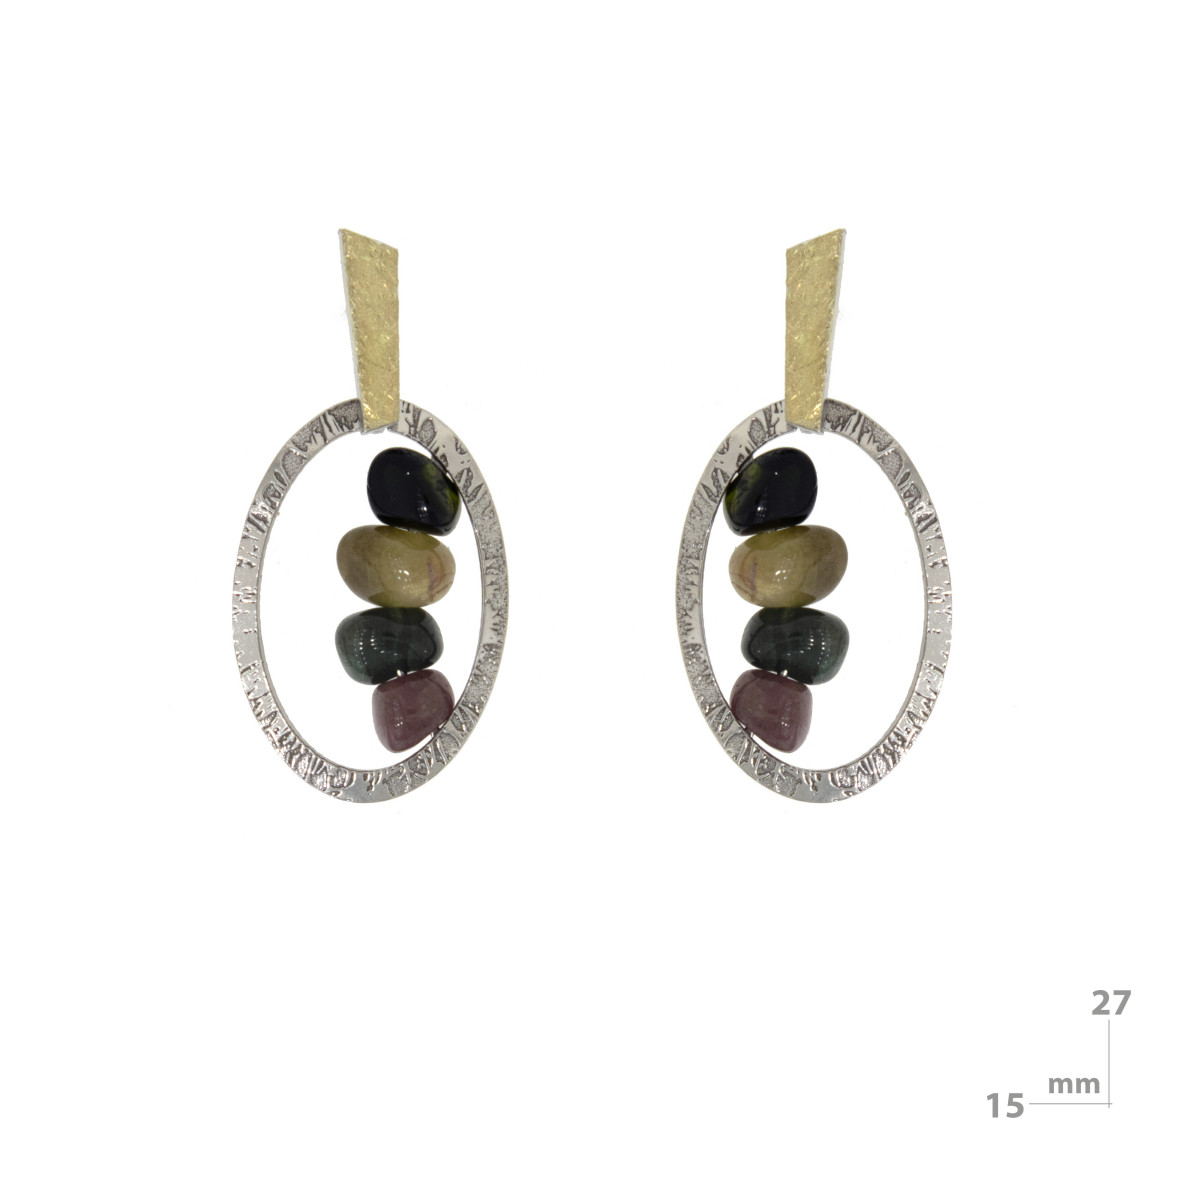 Silver, gold and tourmaline earrings